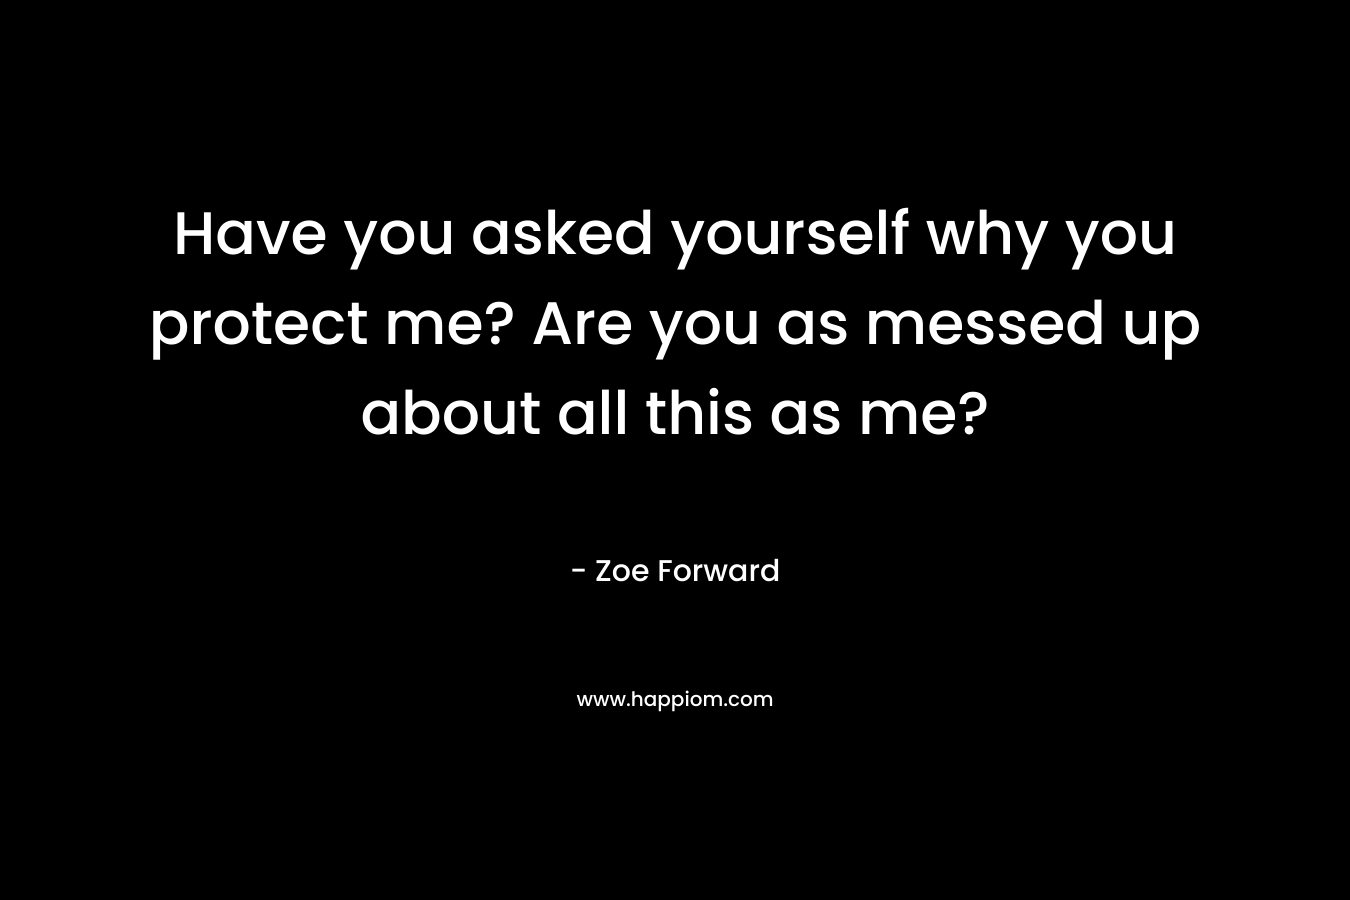 Have you asked yourself why you protect me? Are you as messed up about all this as me? – Zoe Forward